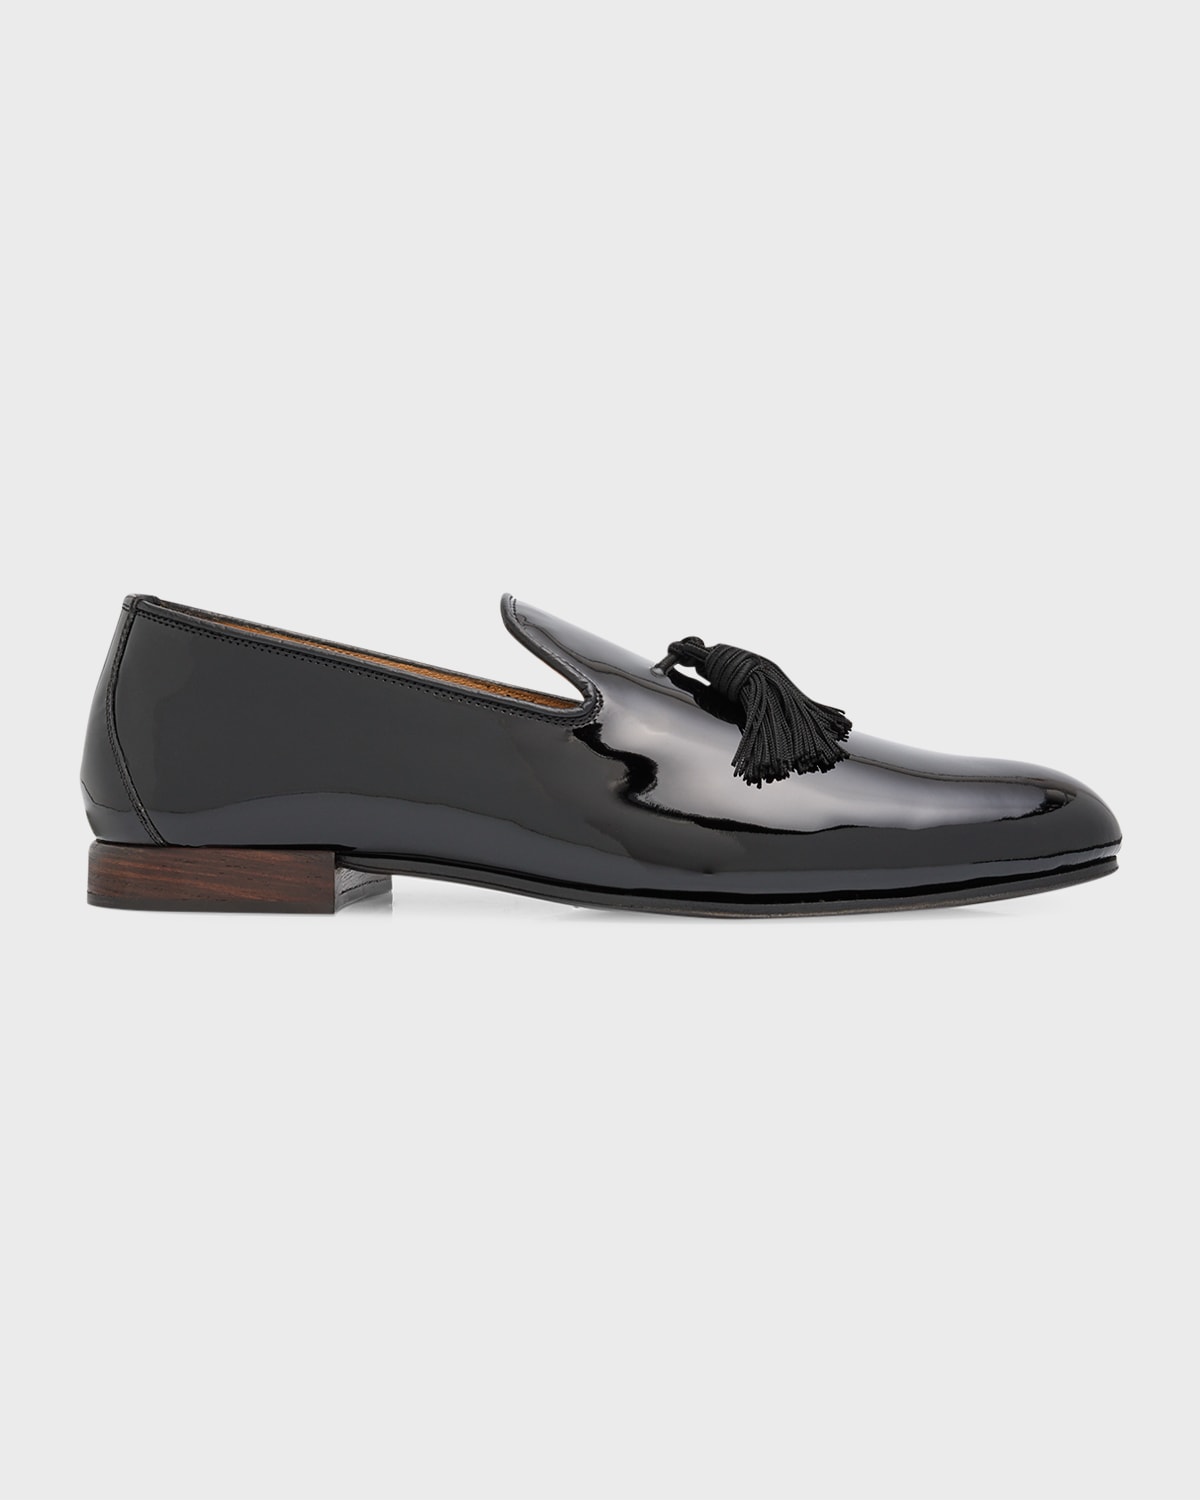 TOM FORD Men's Bailey Patent Tassel Loafers | Neiman Marcus